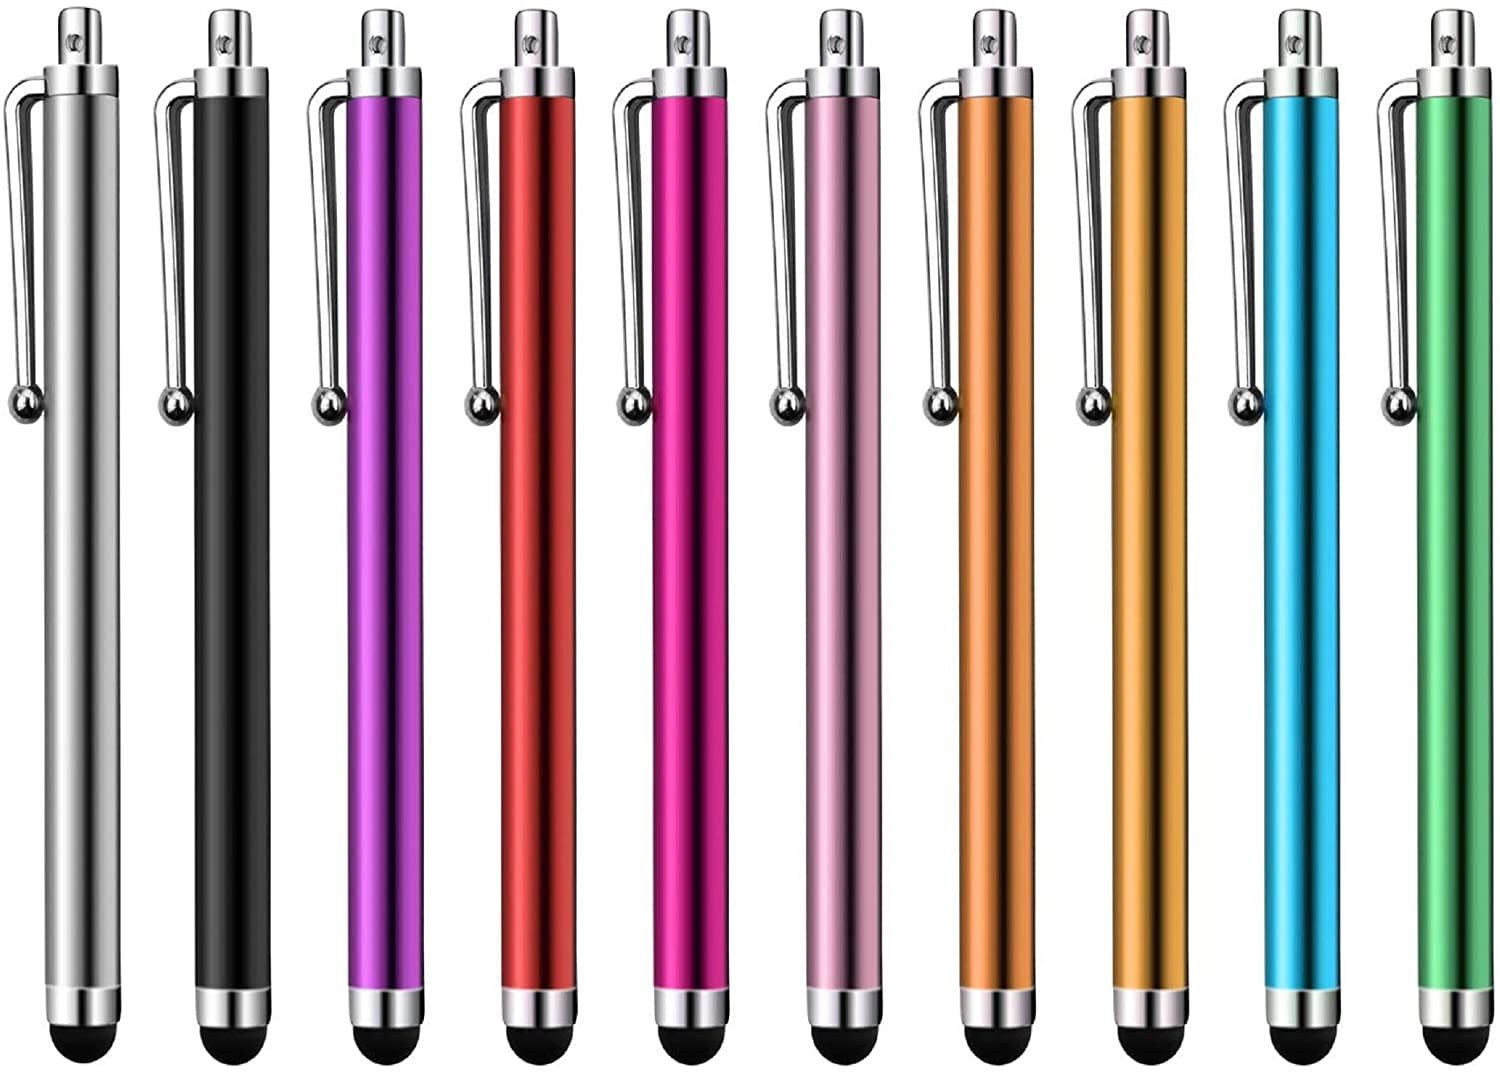 2 in 1 Touch Screen Pen Stylus Universal For iPhone iPad Samsung Tablet Phone PC 